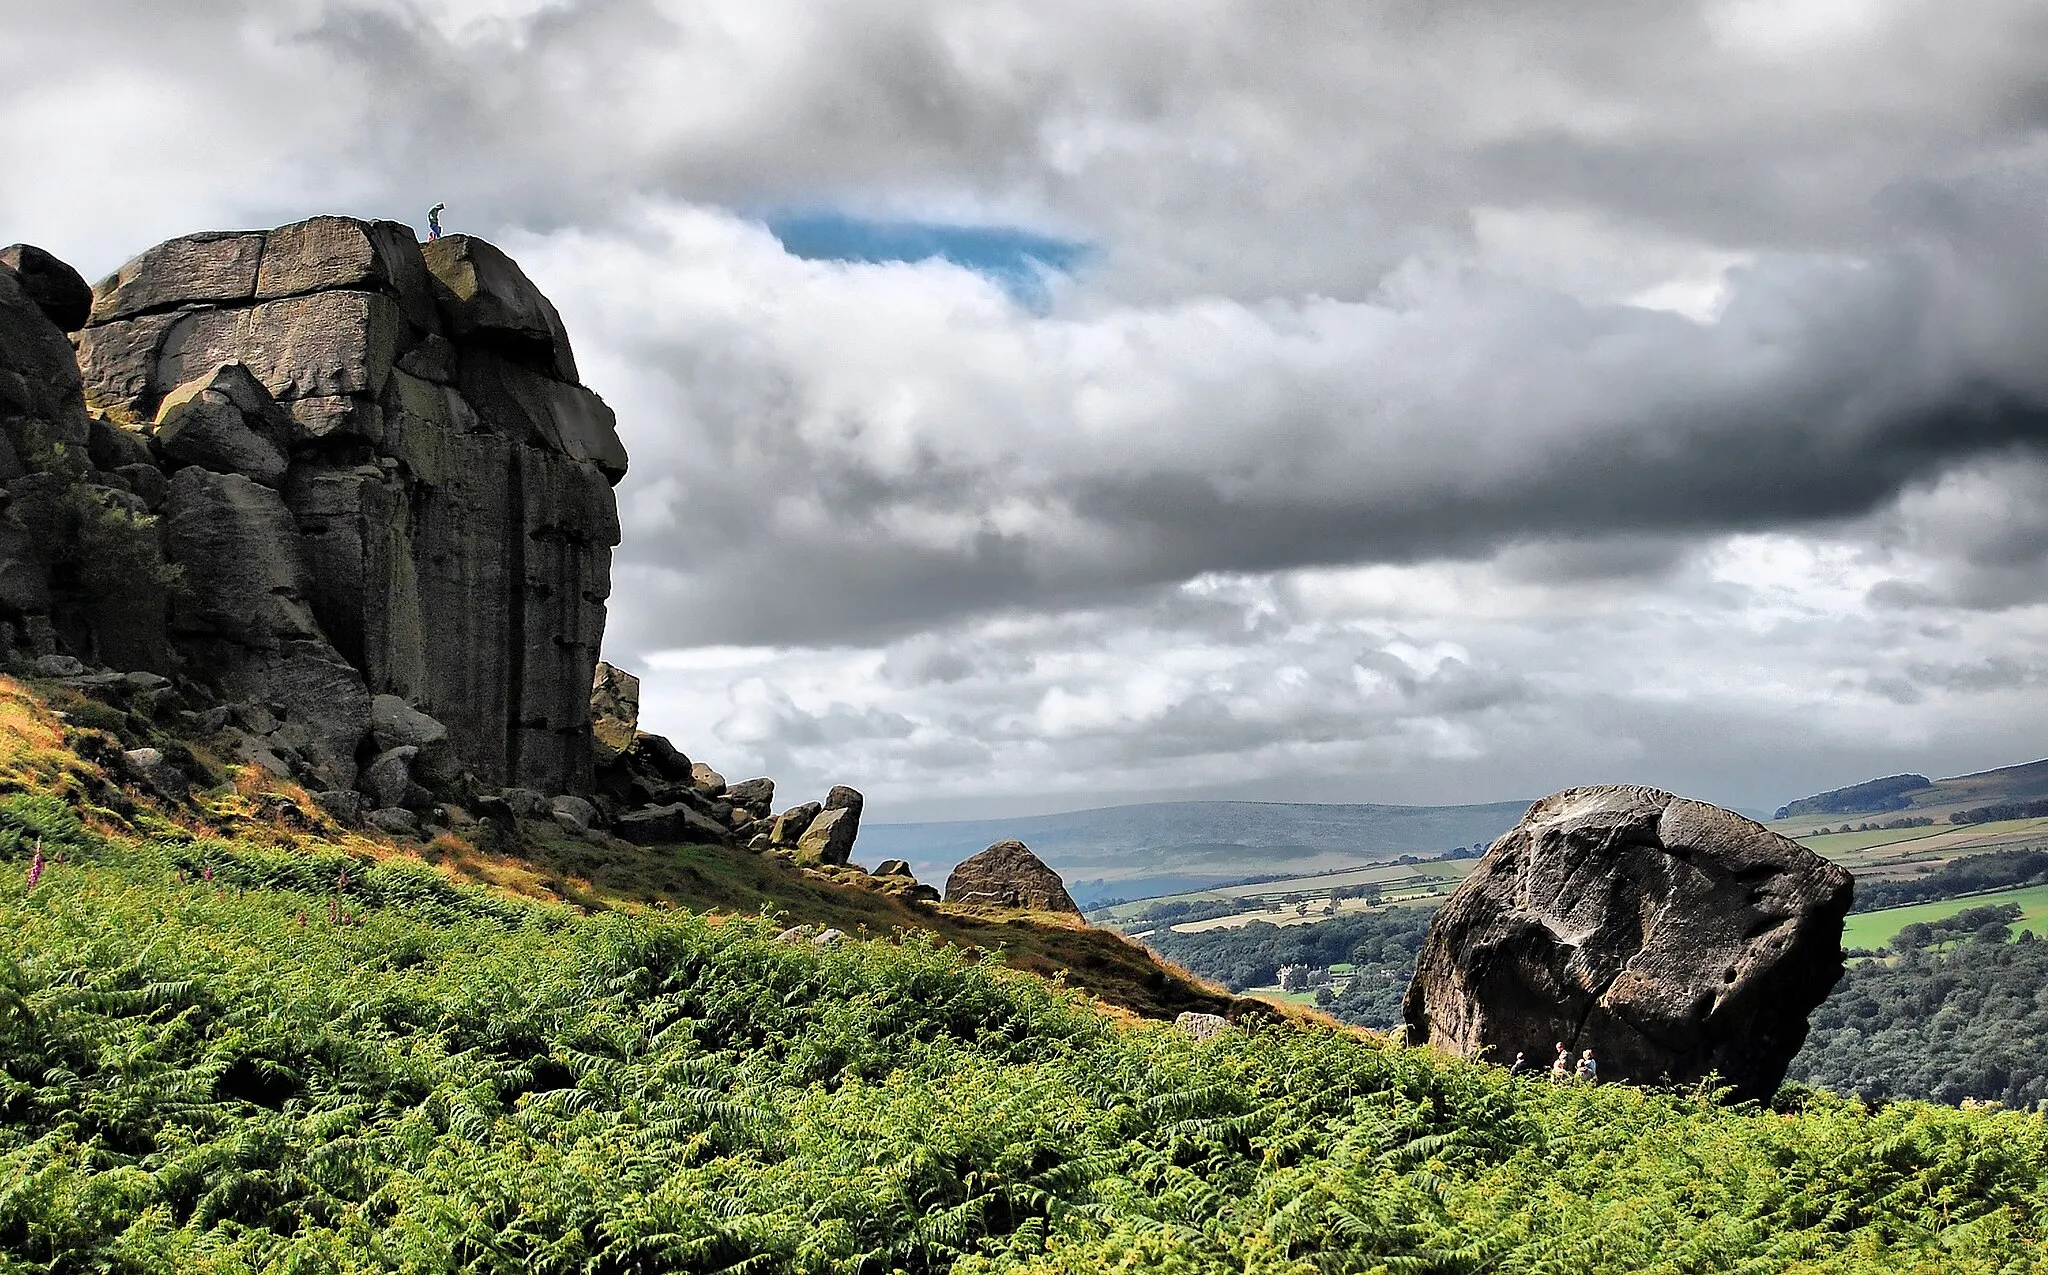 Photo showing: The Cow and Calf rocks above Ilkley.
The smaller rock, or "calf", is estimated to weigh about a thousand tonnes and to have fallen away from the rock face at some point in the last 10,000 years. Geologists suggest its movement was arrested from going further downhill by the Wharfedale ice stream, which had by then sunk to the level at which the boulder now rests.